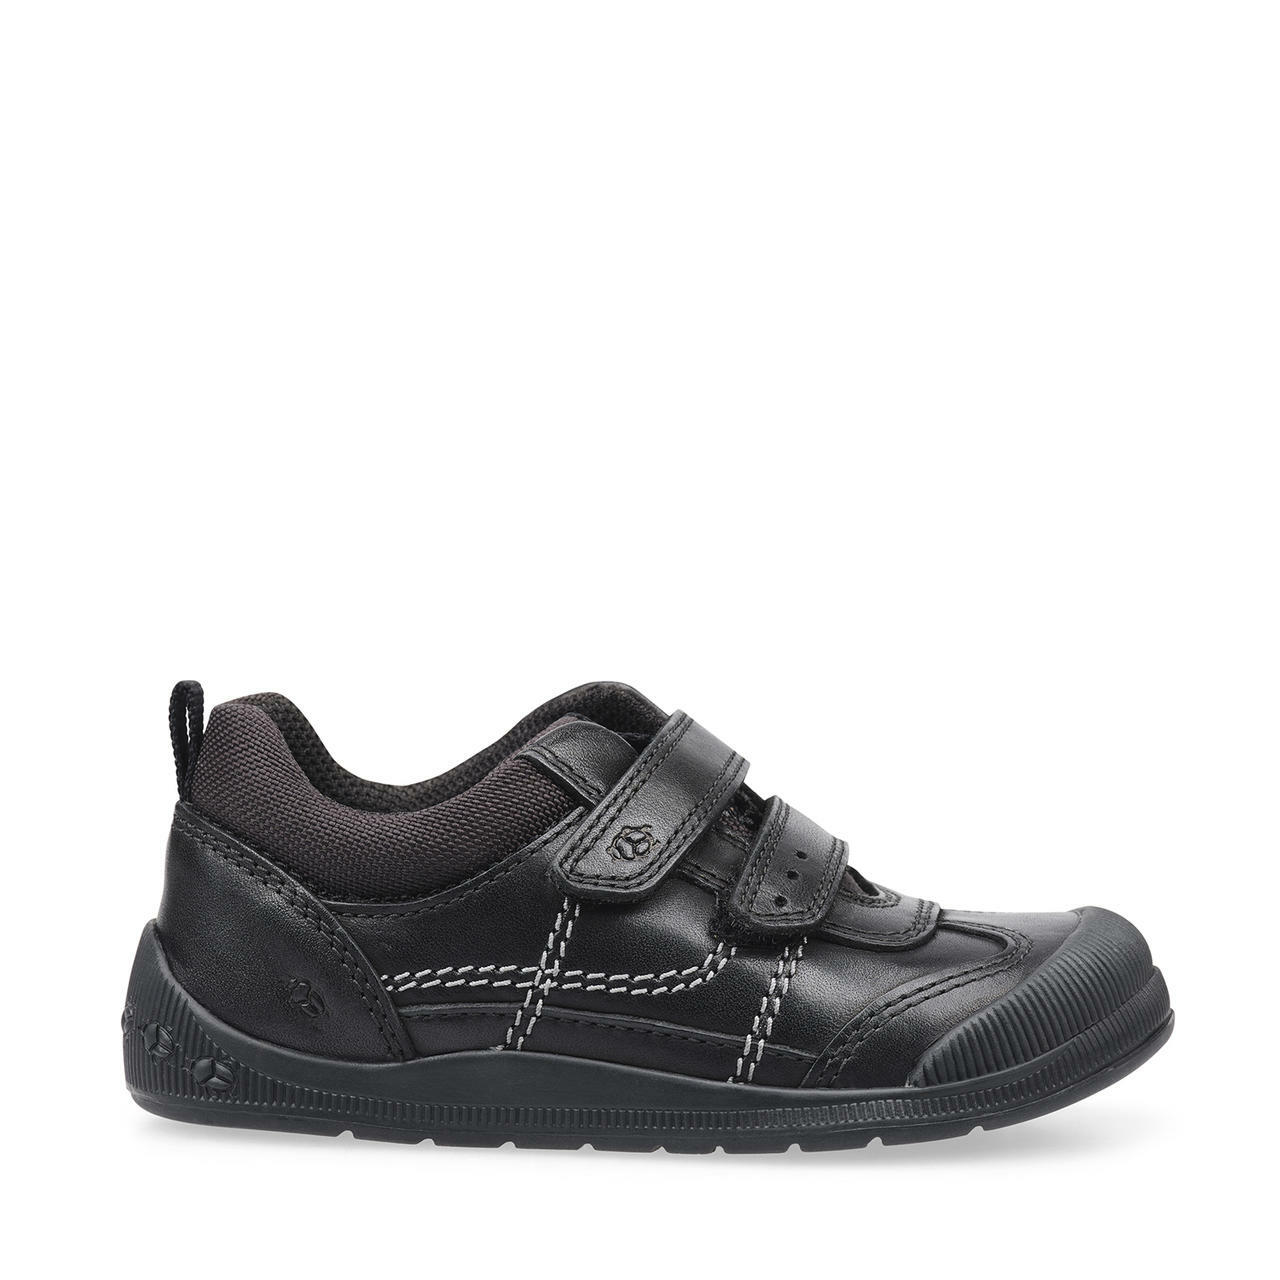 Boys pre school shoe by Start Rite, style Tickle, in black leather with double velcro fastening. Right side view.